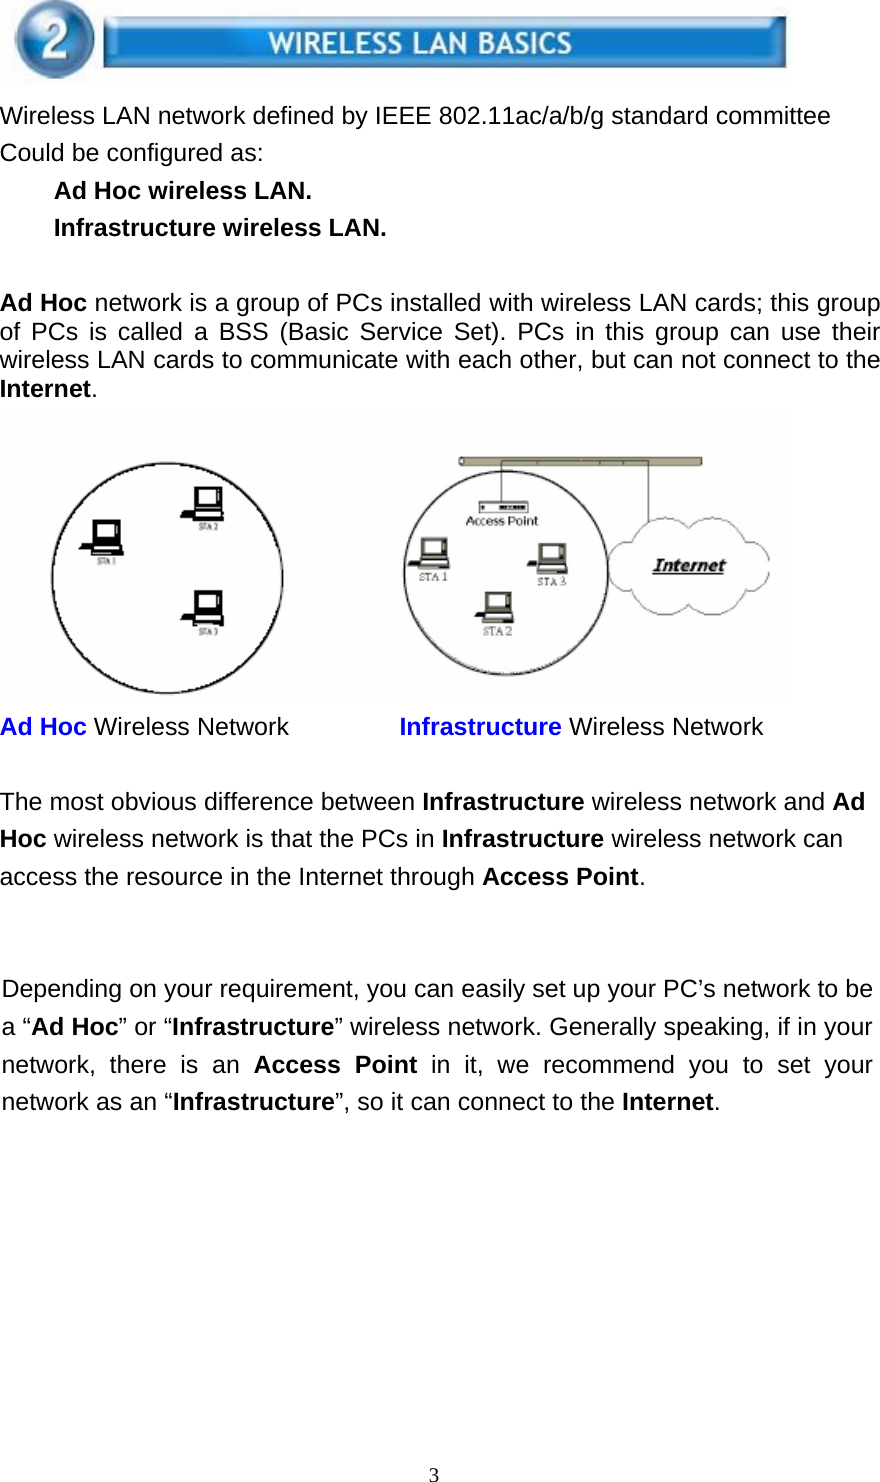 3     Wireless LAN network defined by IEEE 802.11ac/a/b/g standard committee Could be configured as: Ad Hoc wireless LAN. Infrastructure wireless LAN.   Ad Hoc network is a group of PCs installed with wireless LAN cards; this group of PCs is called a BSS (Basic Service Set). PCs in this group can use their wireless LAN cards to communicate with each other, but can not connect to the Internet.  Ad Hoc Wireless Network  Infrastructure Wireless Network   The most obvious difference between Infrastructure wireless network and Ad Hoc wireless network is that the PCs in Infrastructure wireless network can access the resource in the Internet through Access Point.     Depending on your requirement, you can easily set up your PC’s network to be a “Ad Hoc” or “Infrastructure” wireless network. Generally speaking, if in your network, there is an Access Point in it, we recommend you to set your network as an “Infrastructure”, so it can connect to the Internet. 